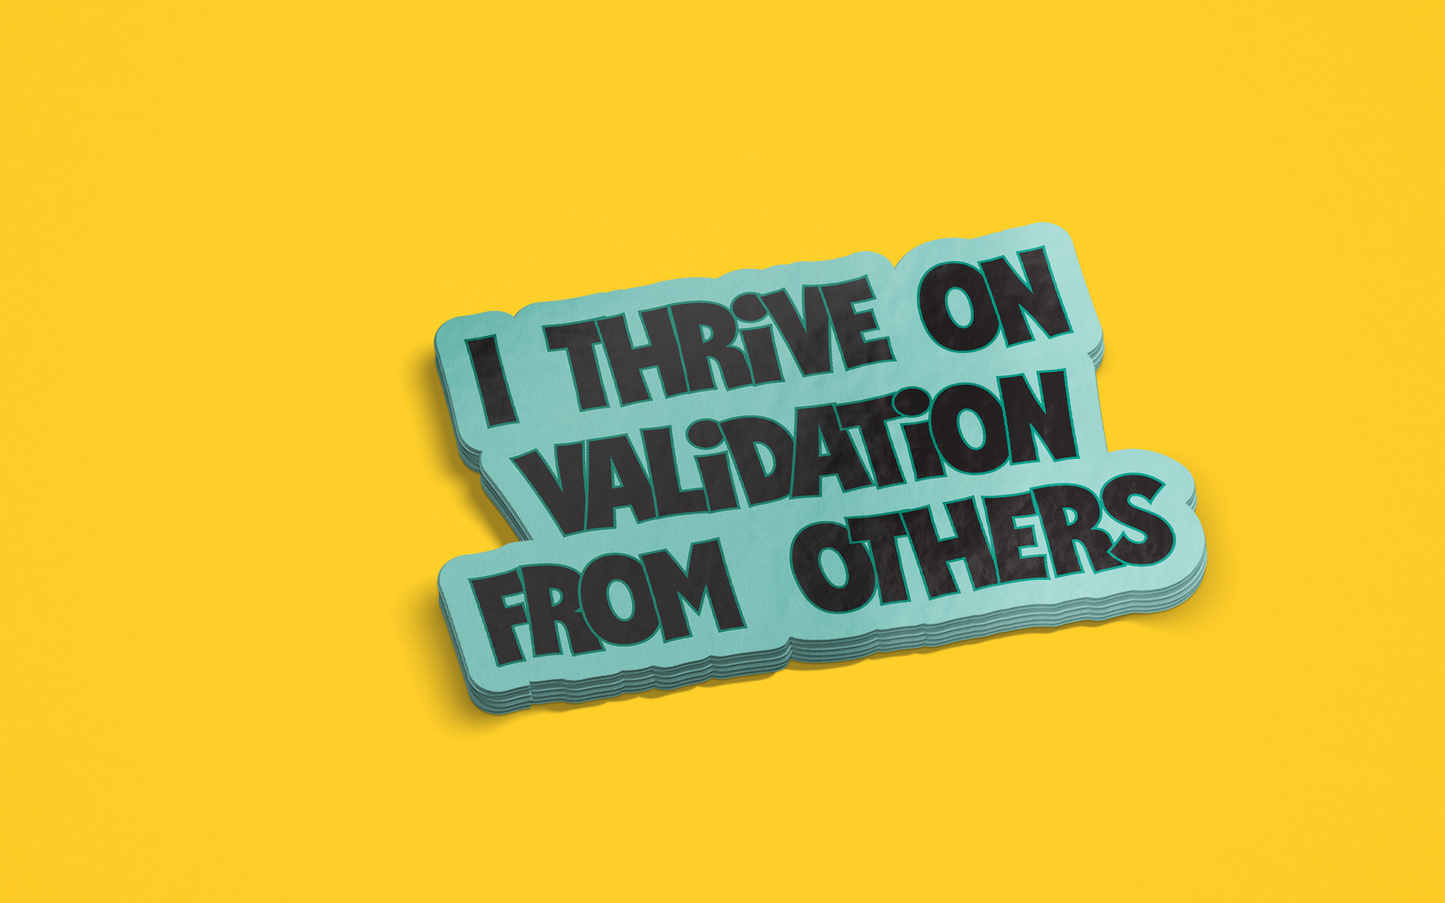 I Thrive on Validation from Others Sticker - Funny Adult Sti